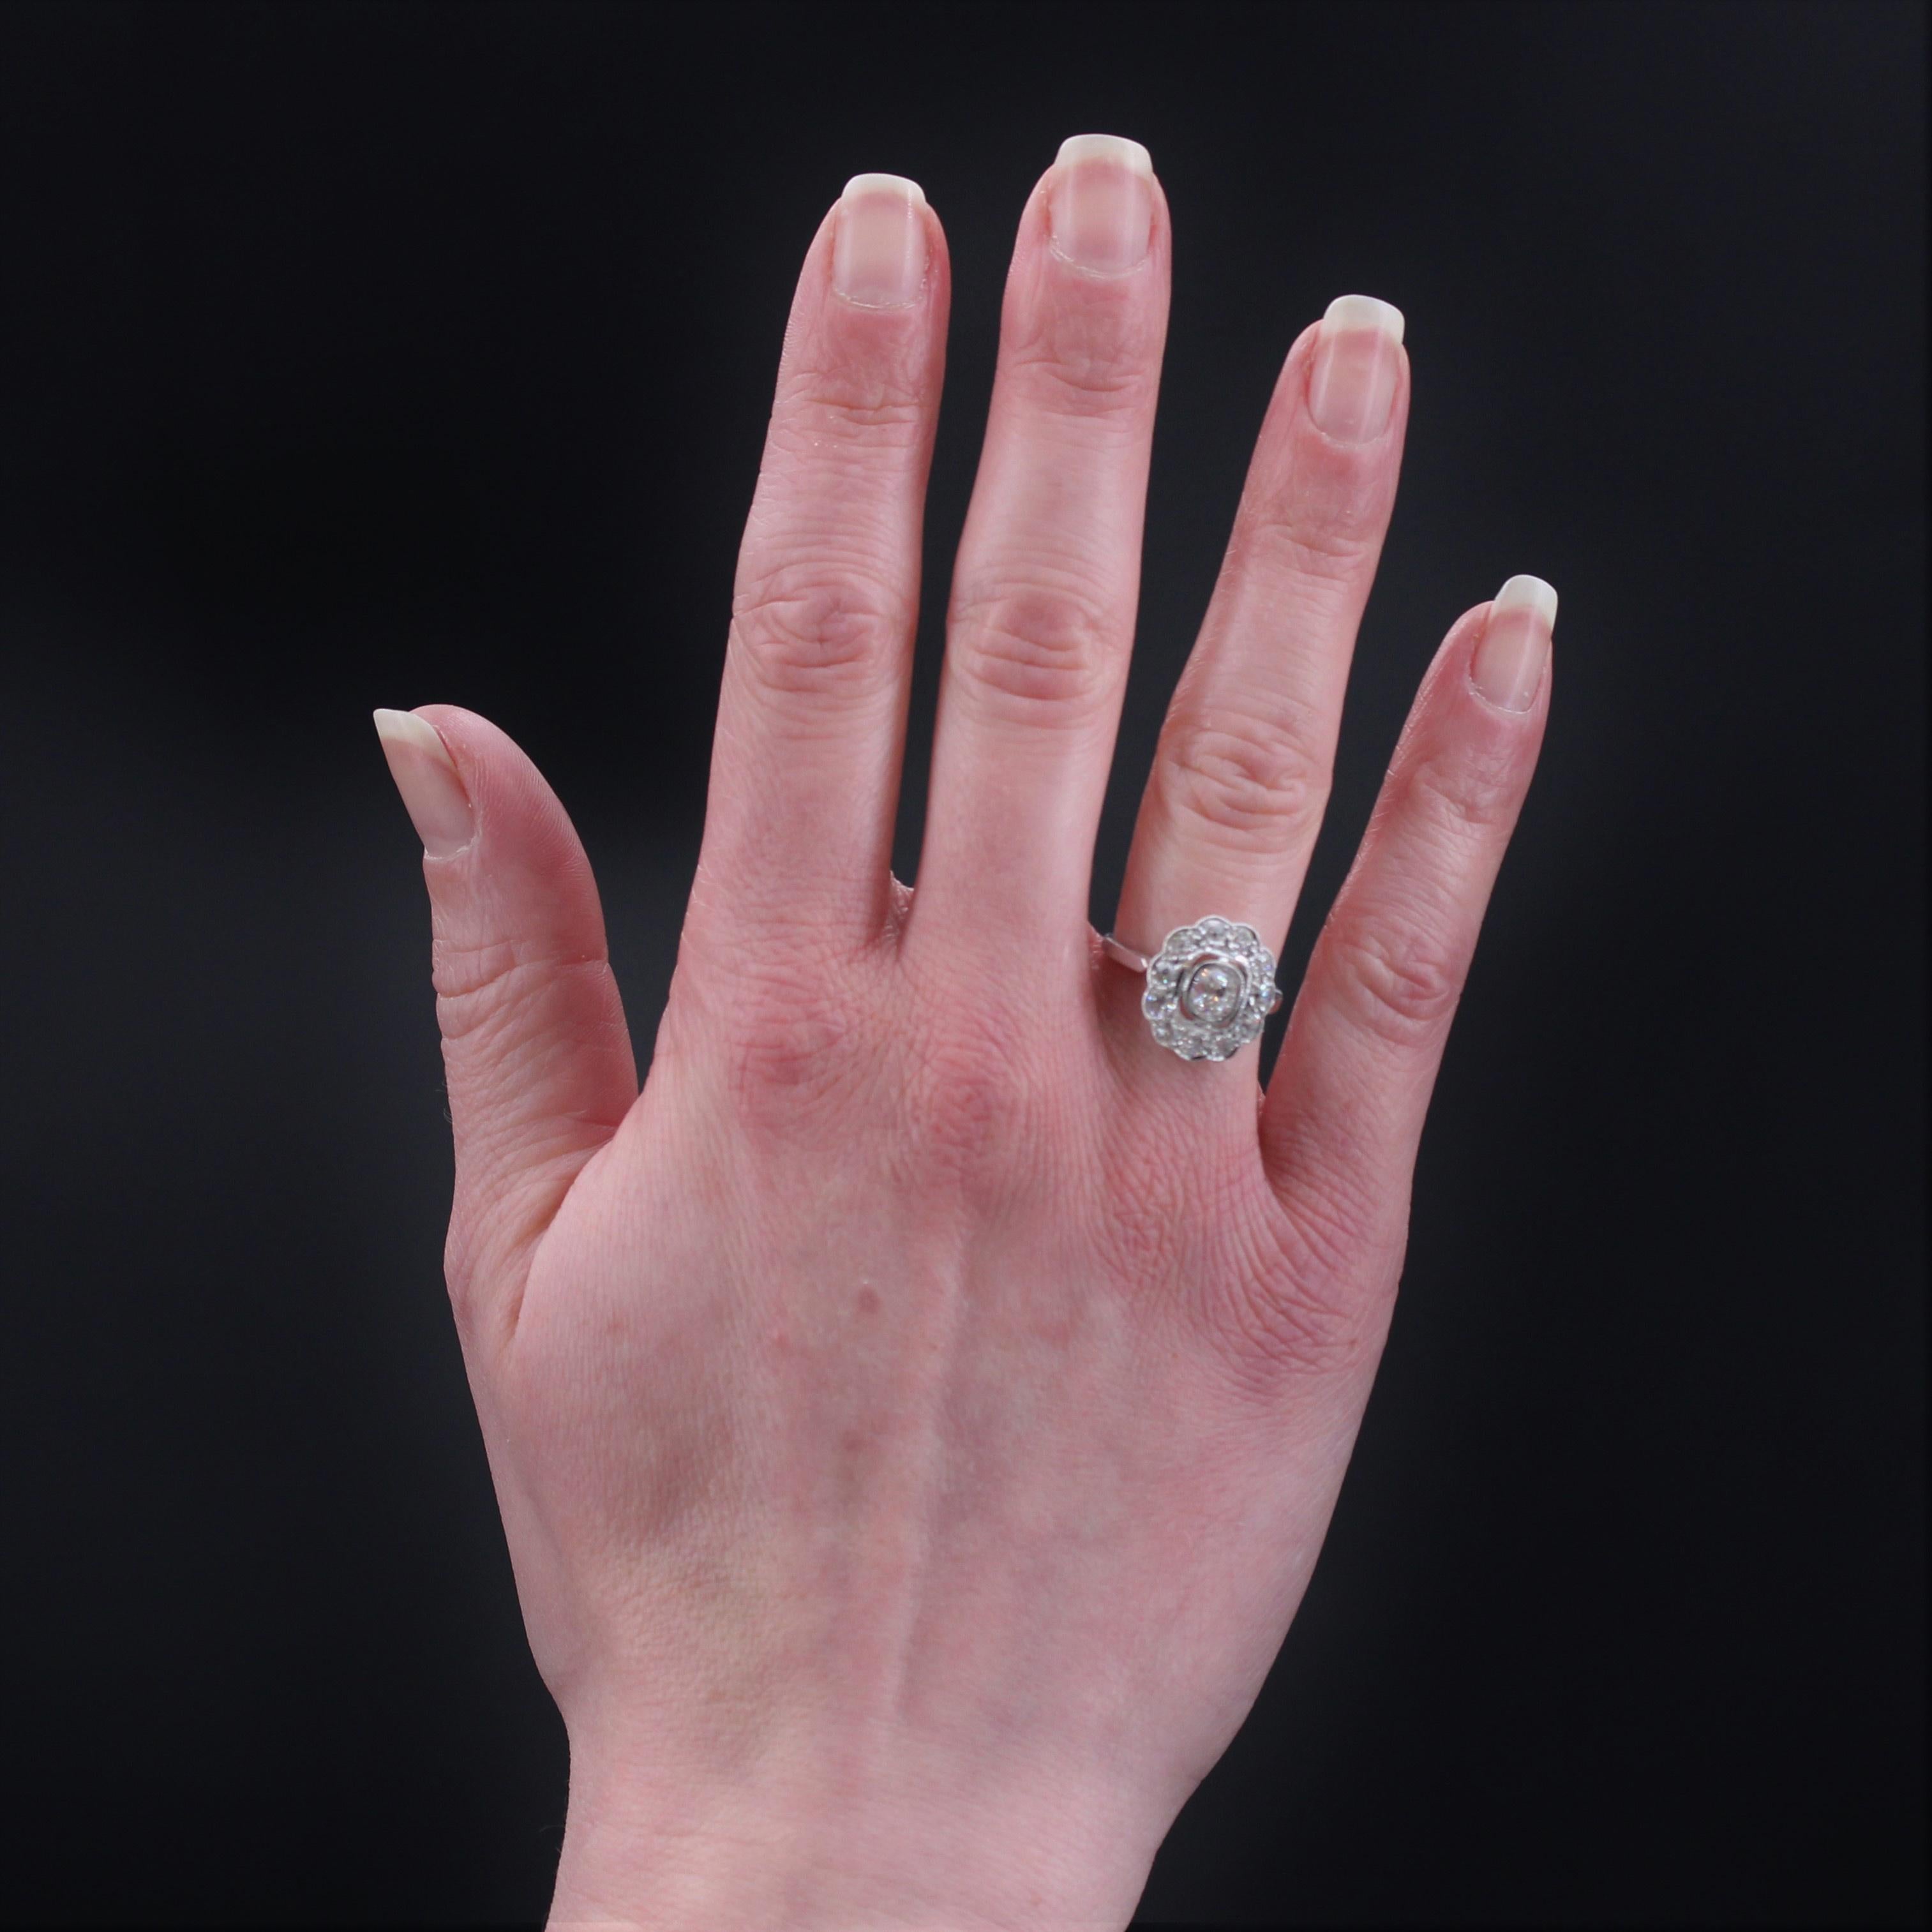 Ring in platinum.
Charming antique daisy ring, its setting is moved like a flower and decorated with brilliant- cut diamonds and antique cushion- cut diamonds all around. In the center, a more important cushion-cut diamond is set in a closed